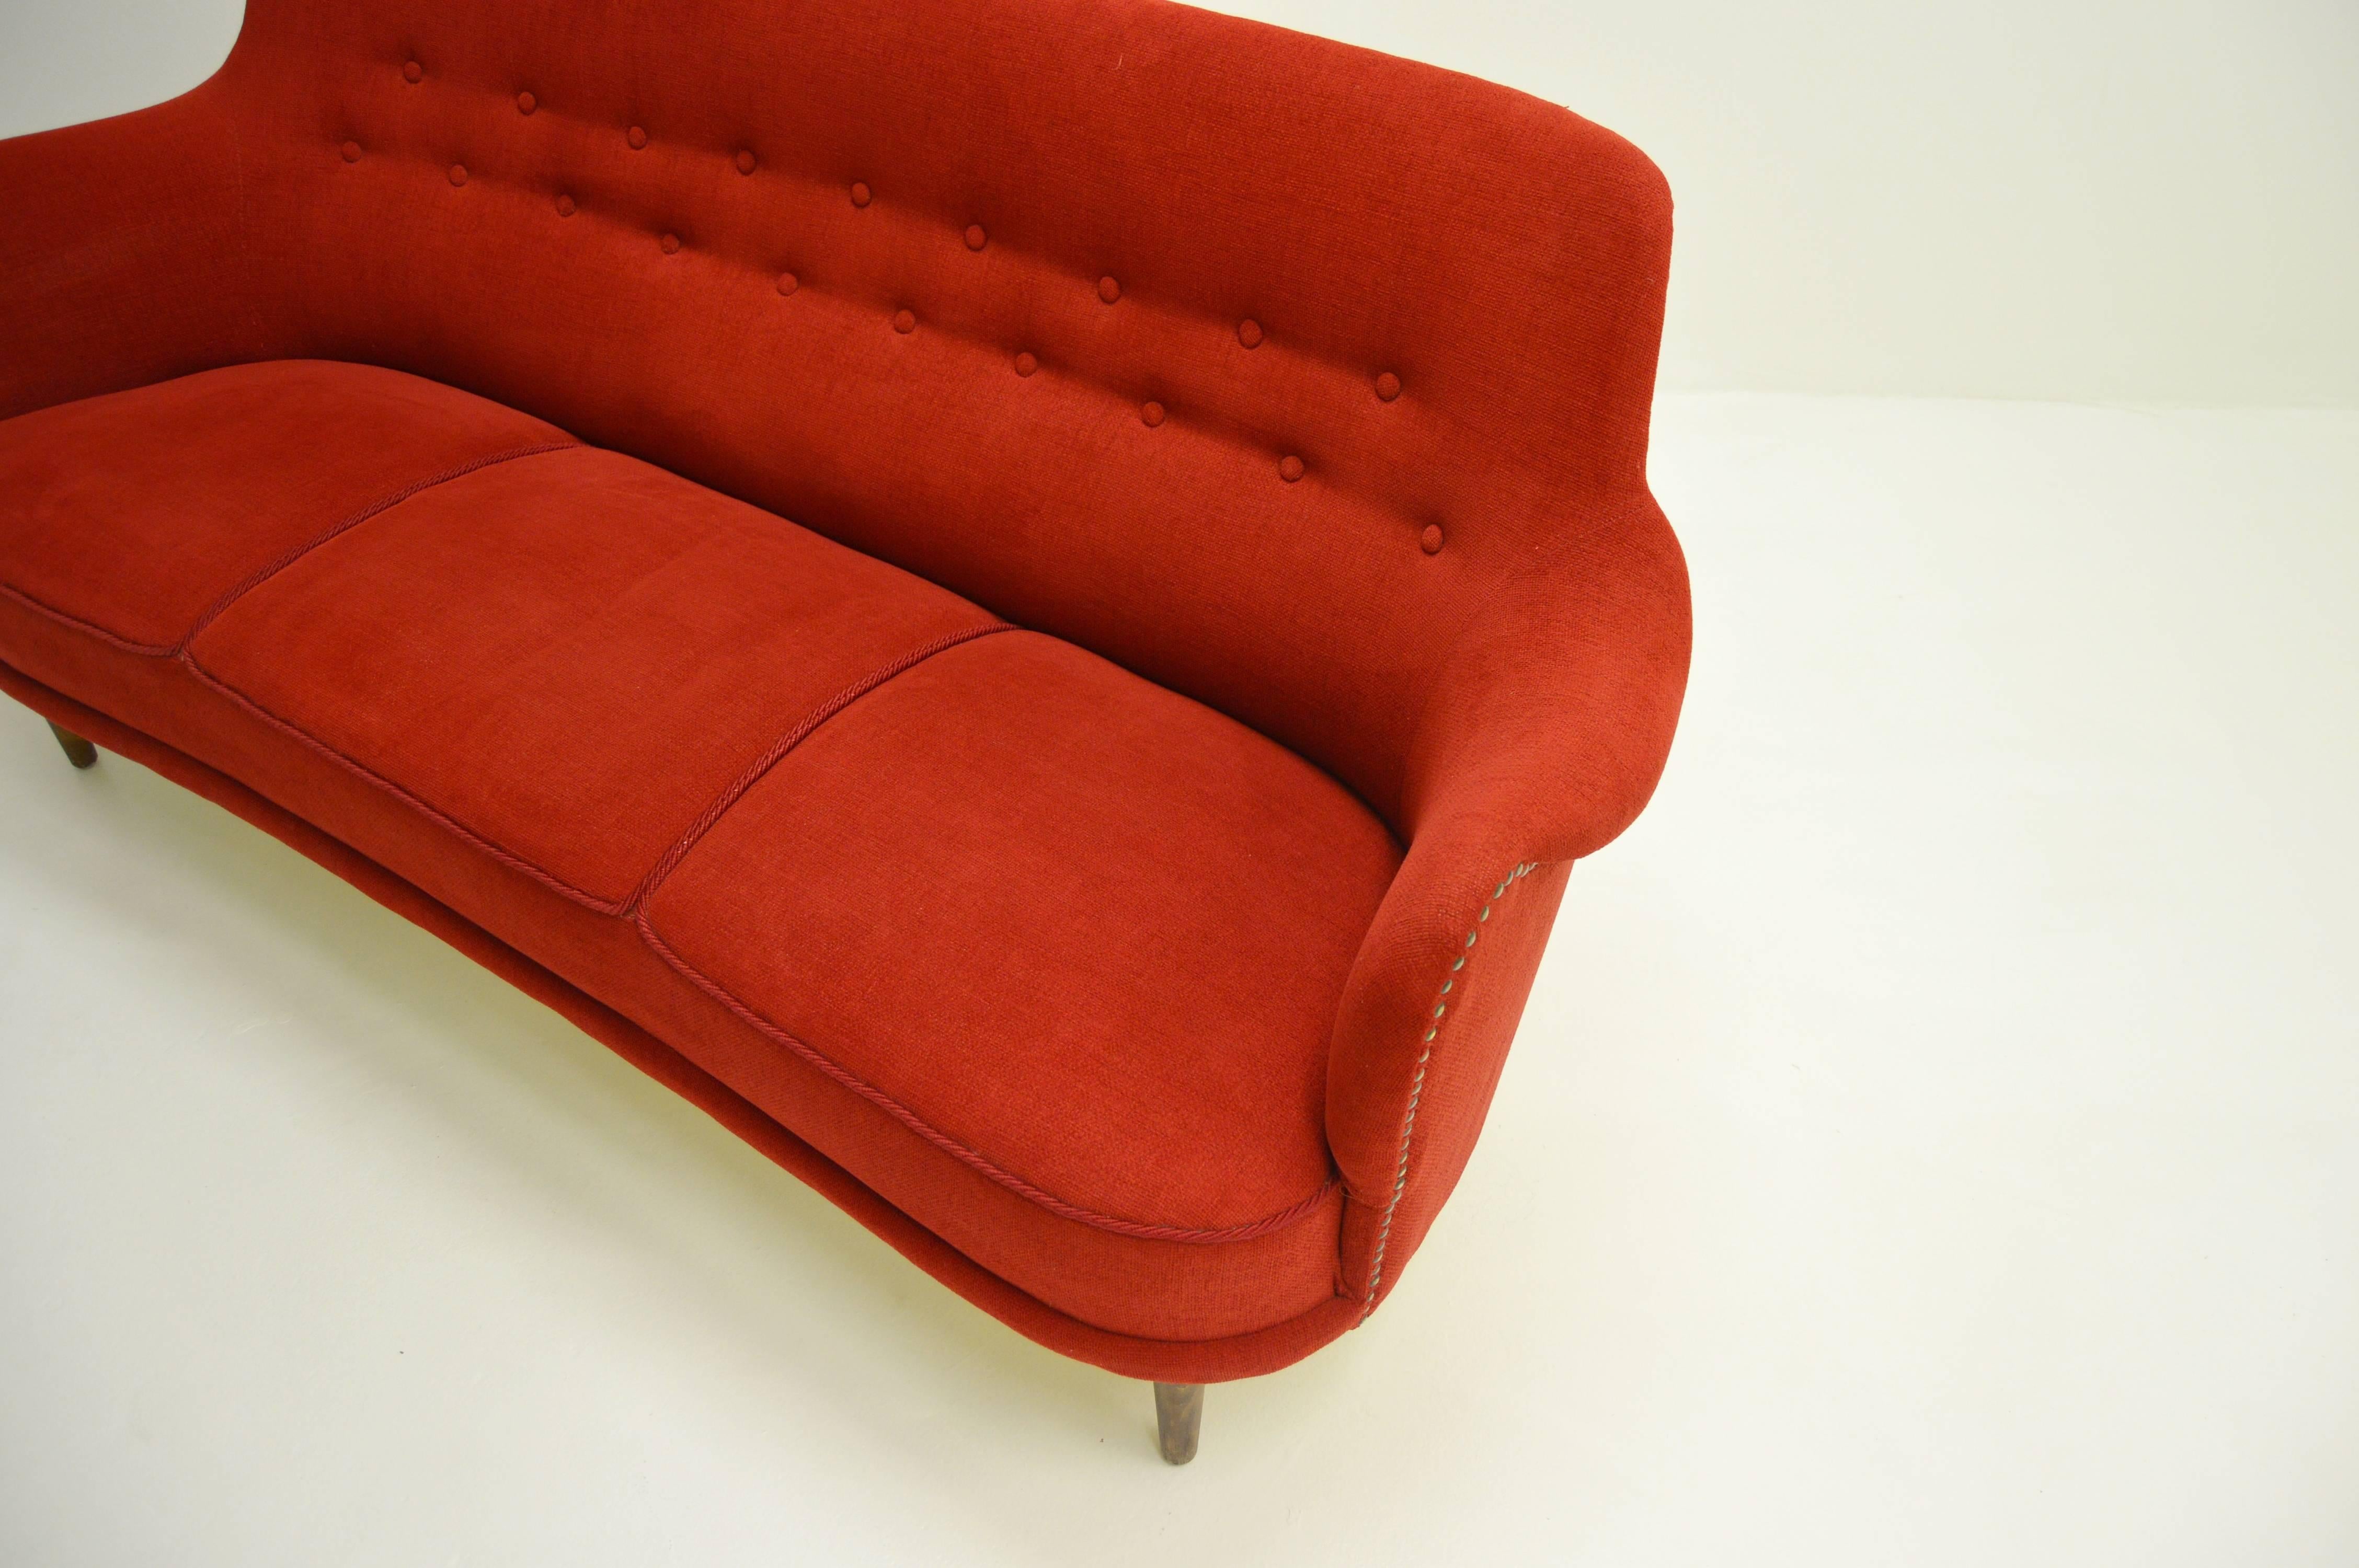 Nice sofa designed by Carl Malmsten. Modern classic design. Malmsten has won several prices for his designs.

This sofa was reupholstered in the 1990s.

 